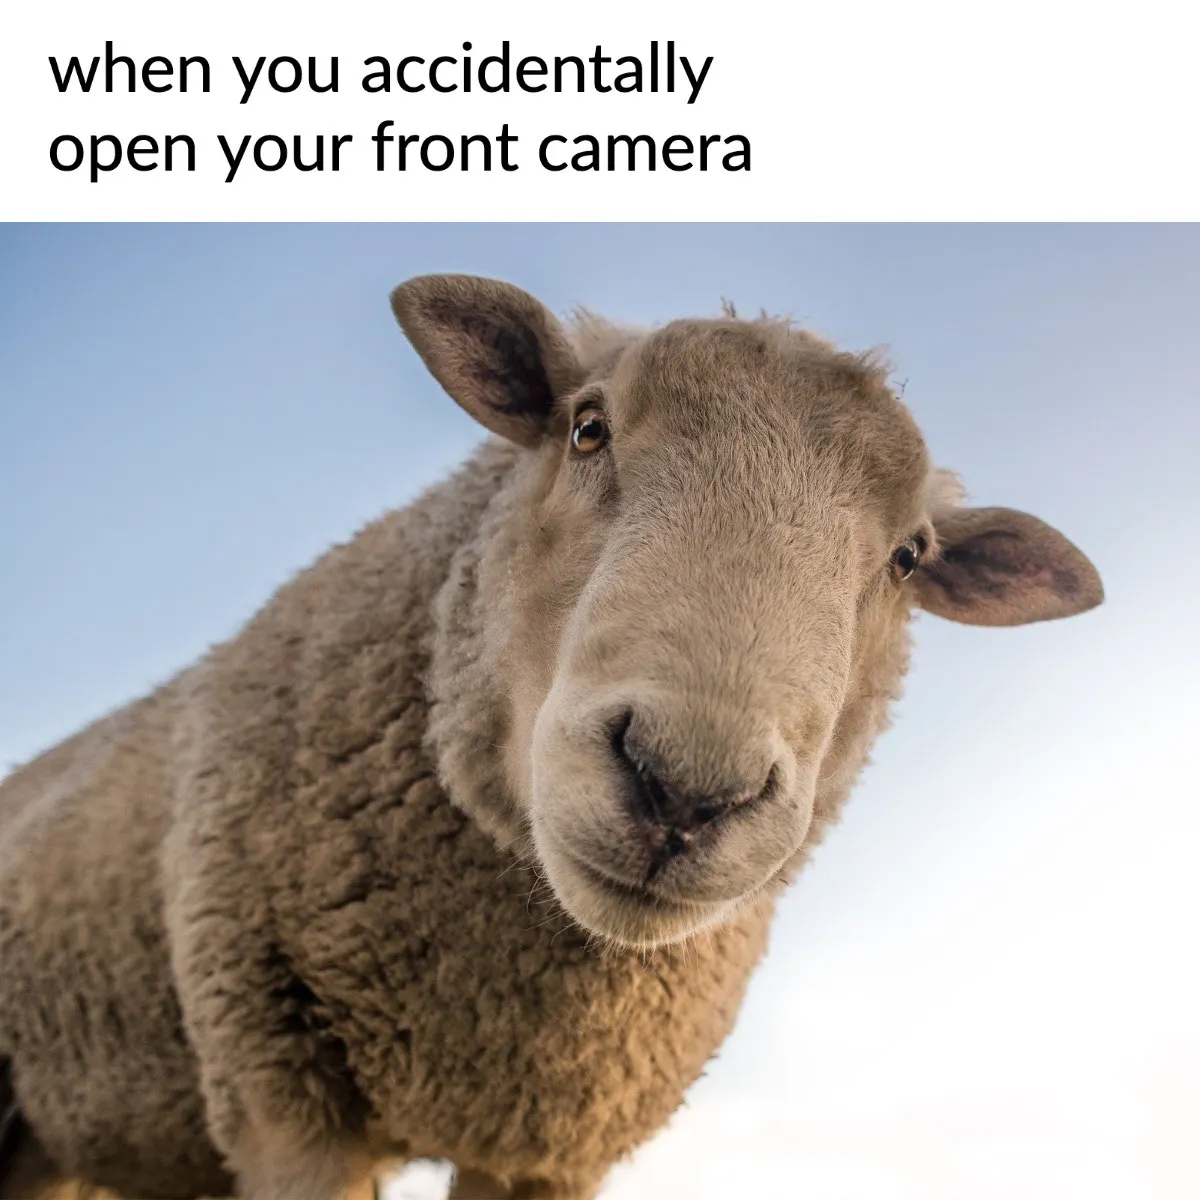 Funny Sheep Animal Meme Open Front Camera